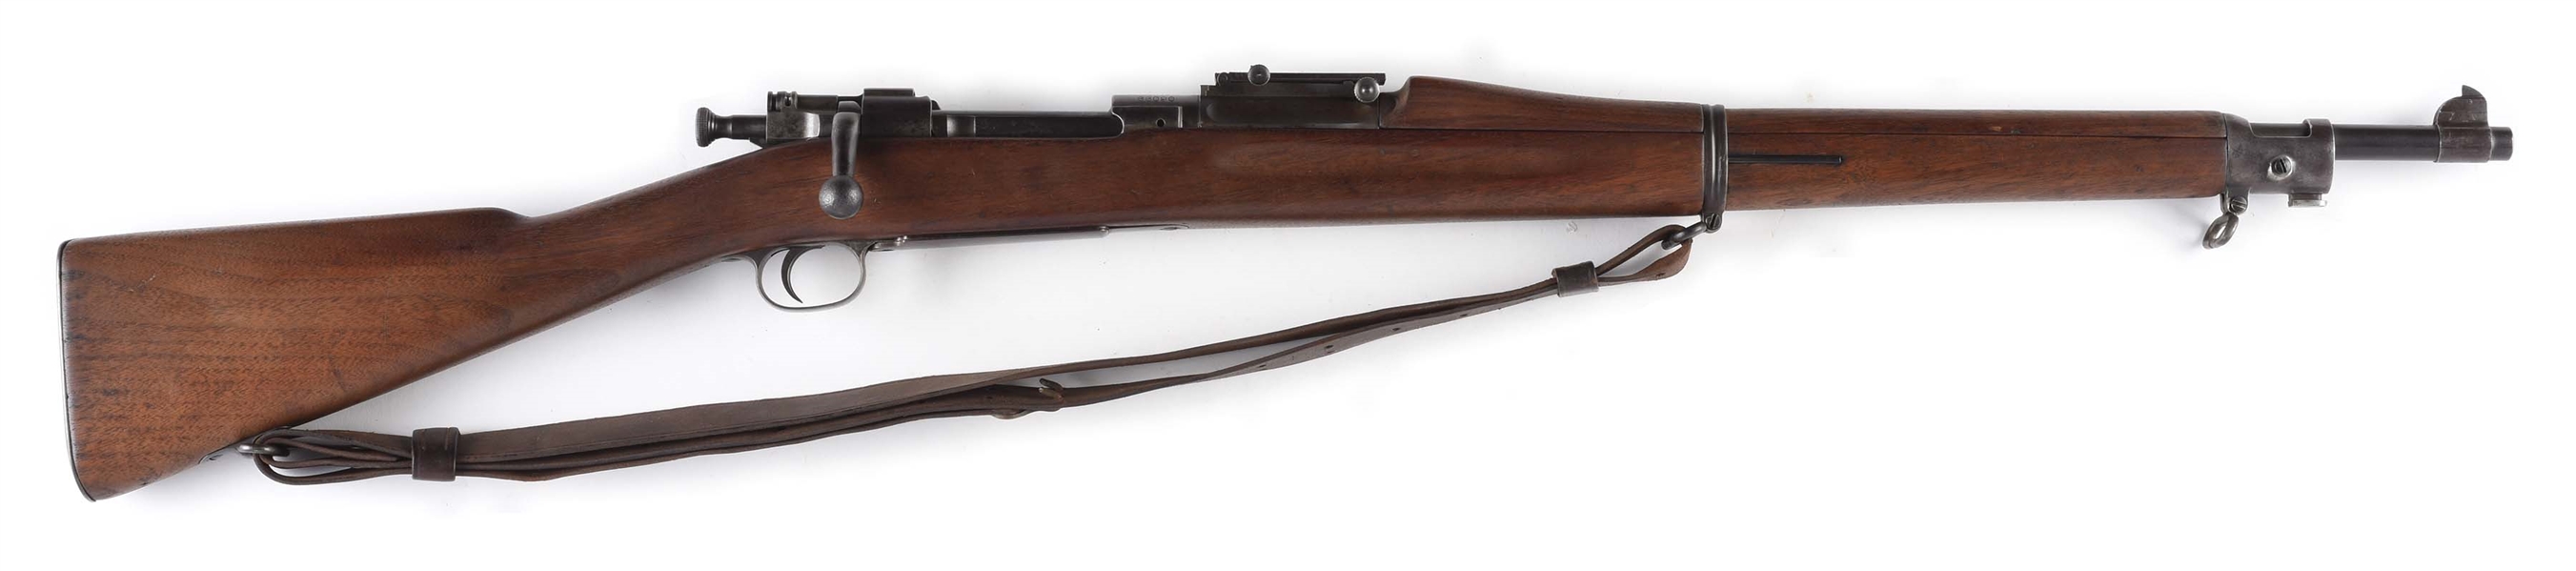 (C) EARLY US SPRINGFIELD MODEL 1903/05 .30-06 BOLT ACTION RIFLE.